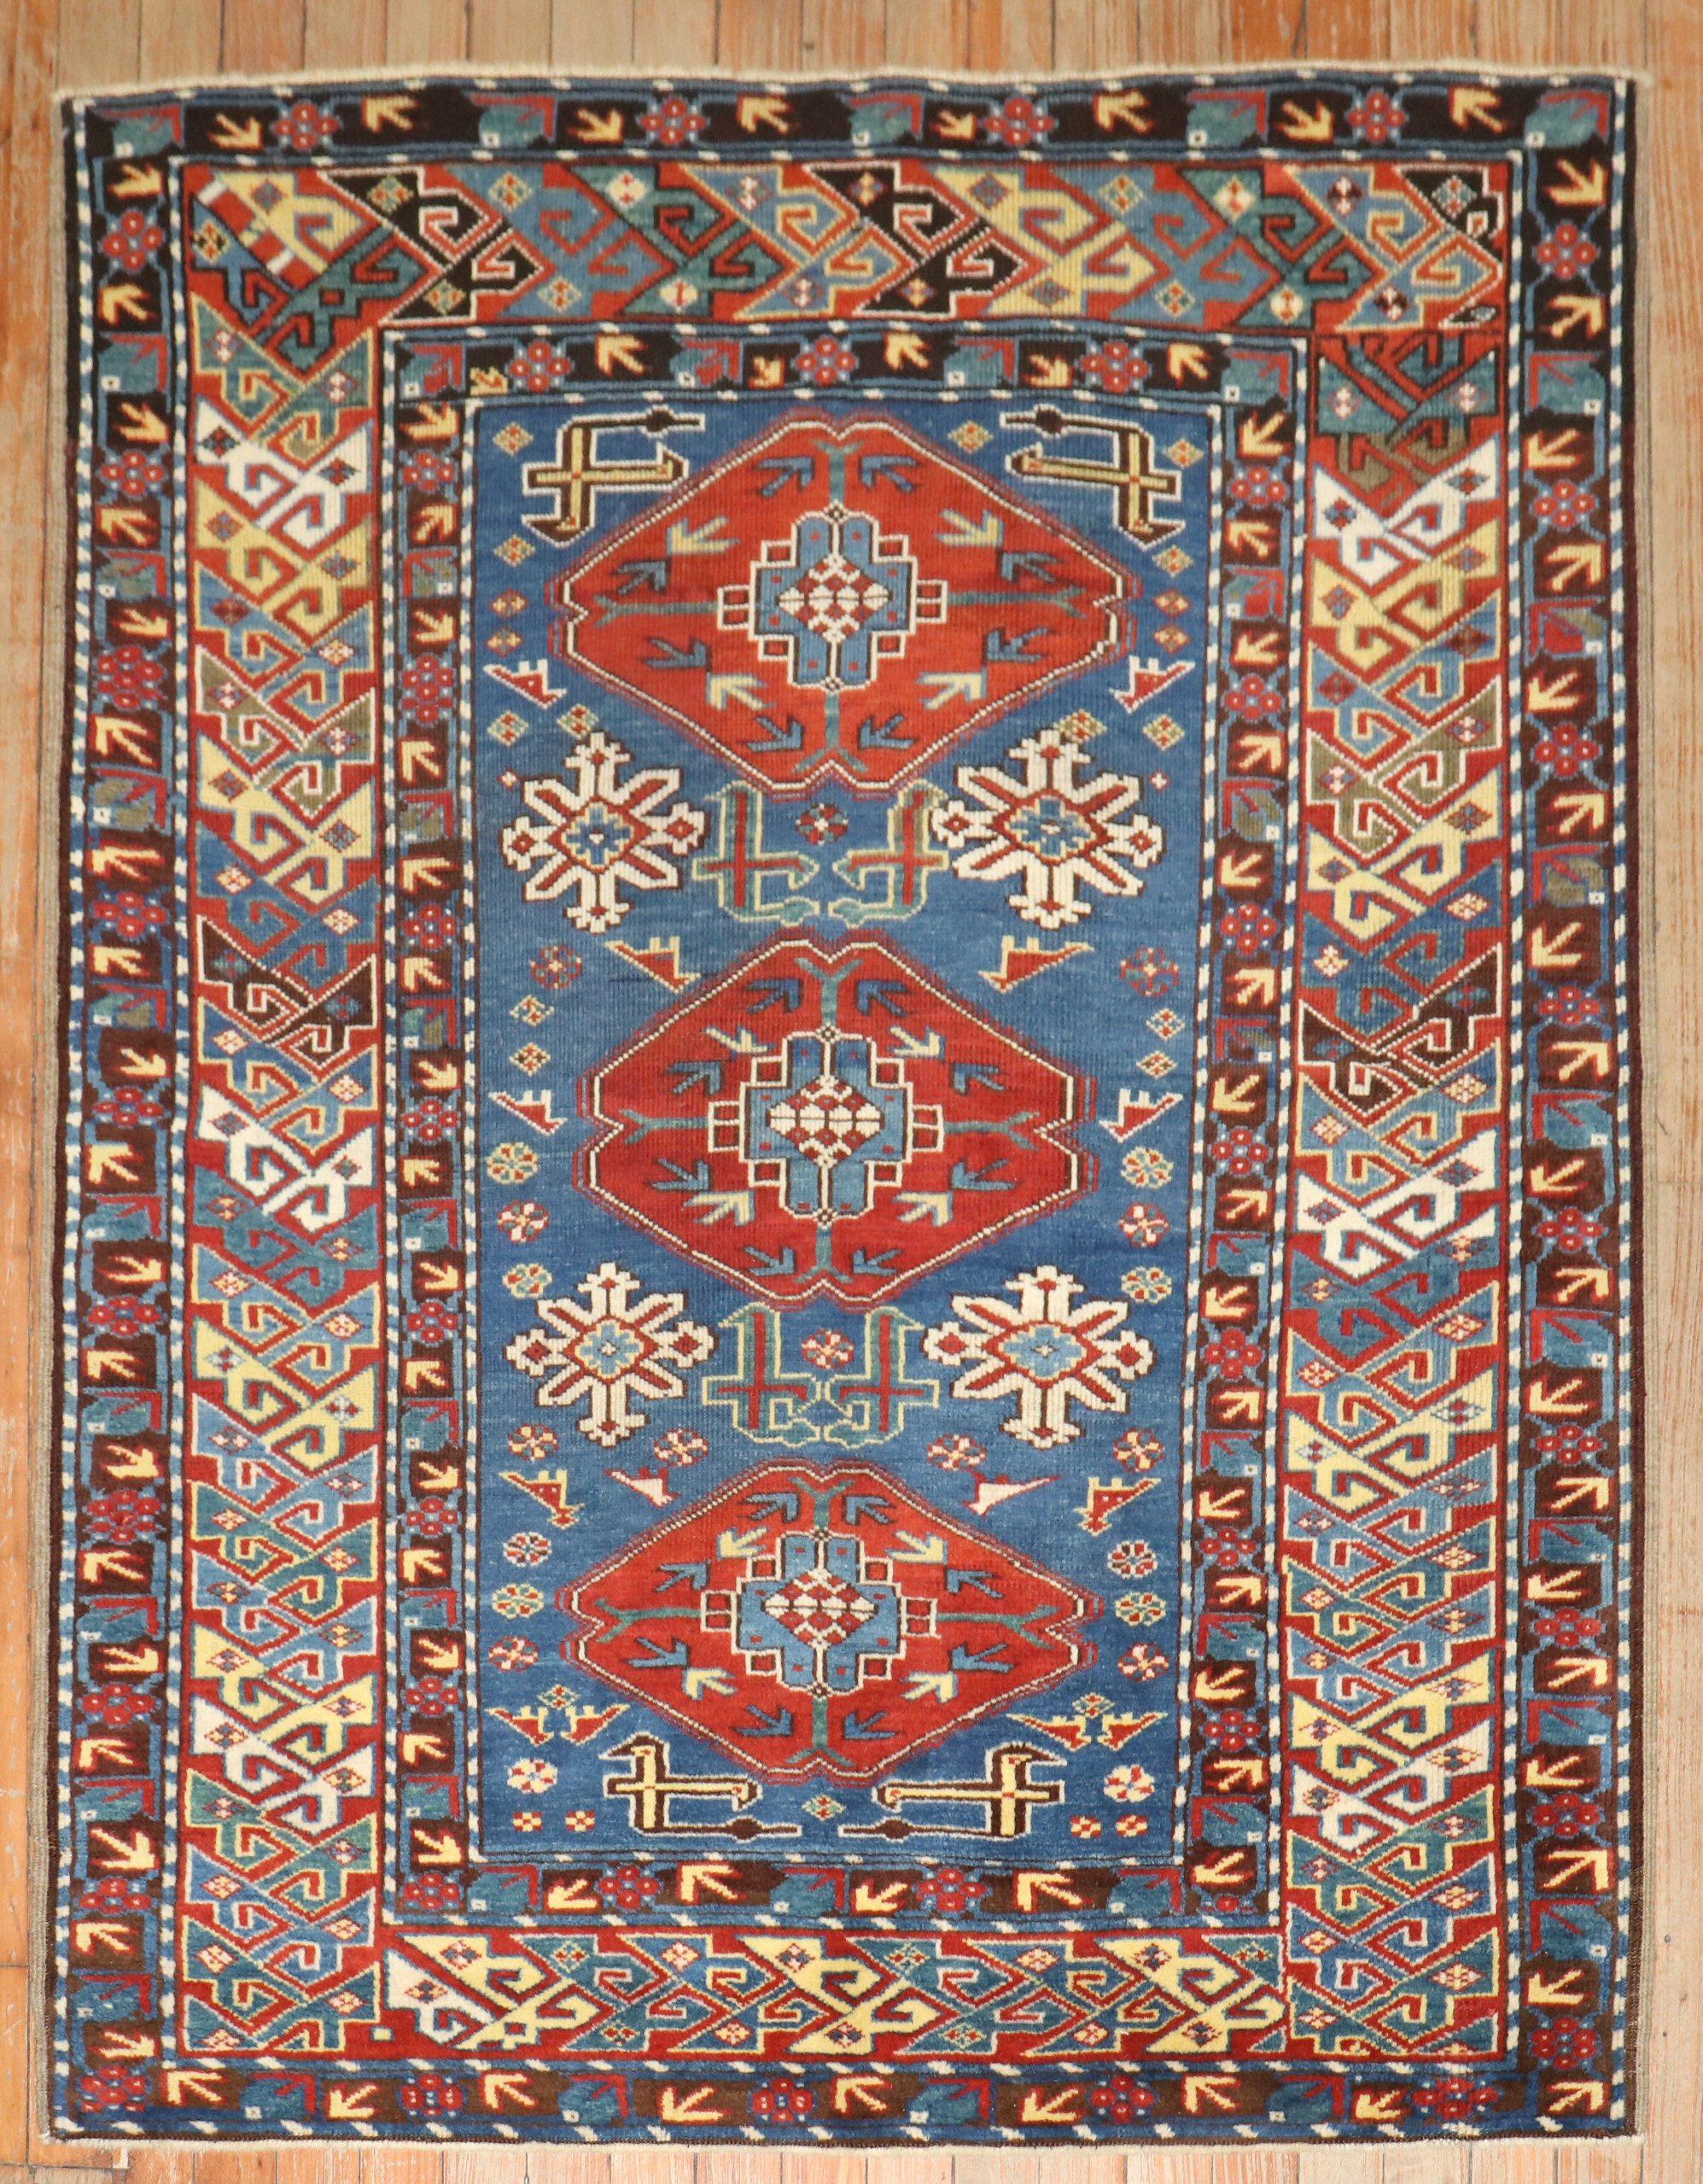 Late 19th century scatter size shirvan rug

Details
rug no.	j3867
size	3'7